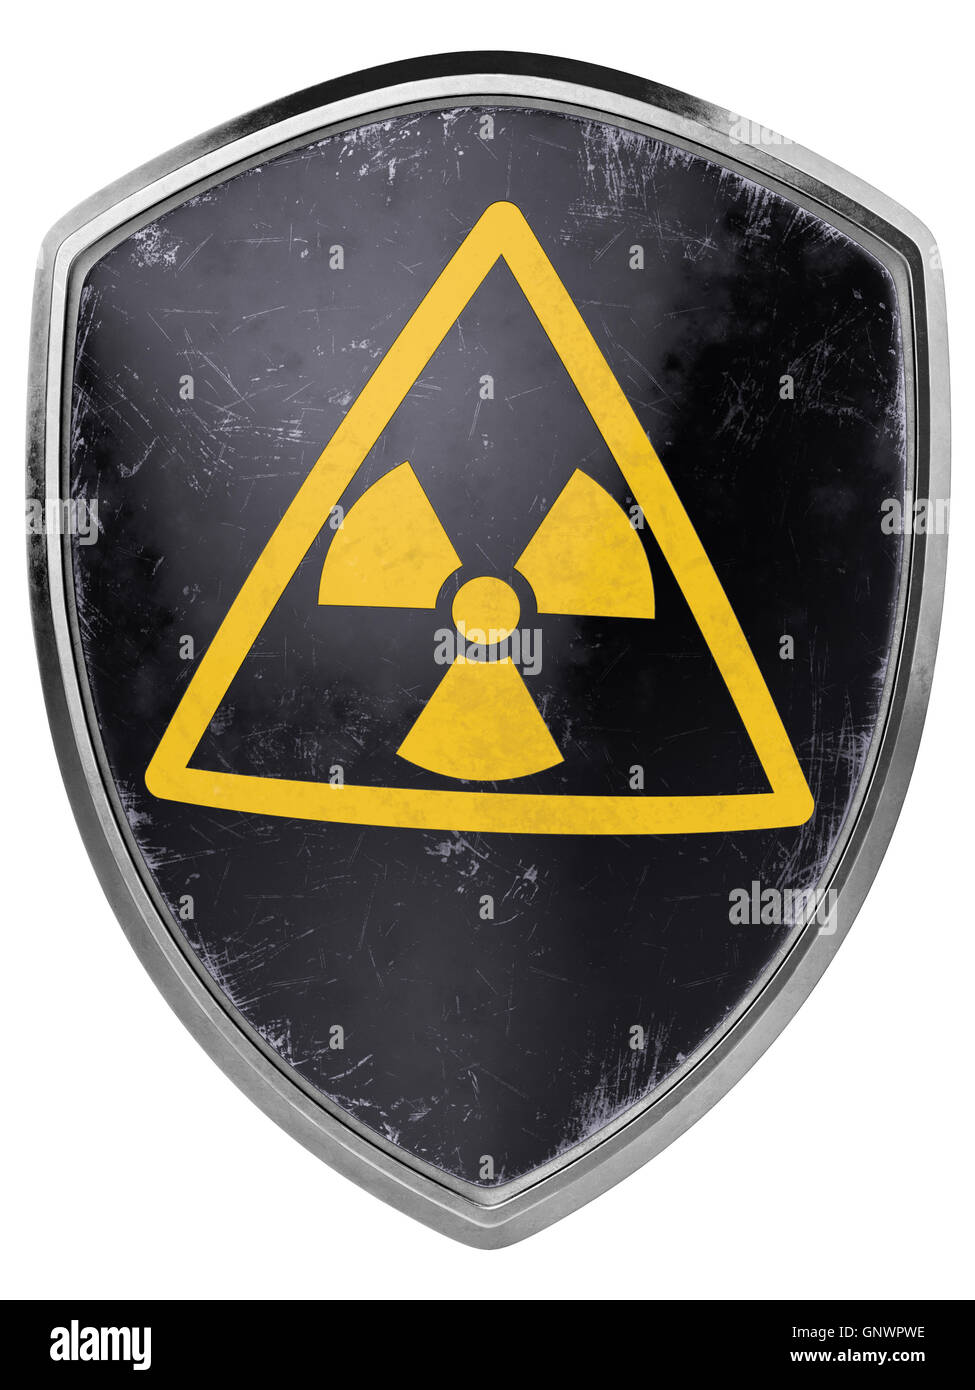 Worn nuclear shield icon. 3D Illustration. Stock Photo